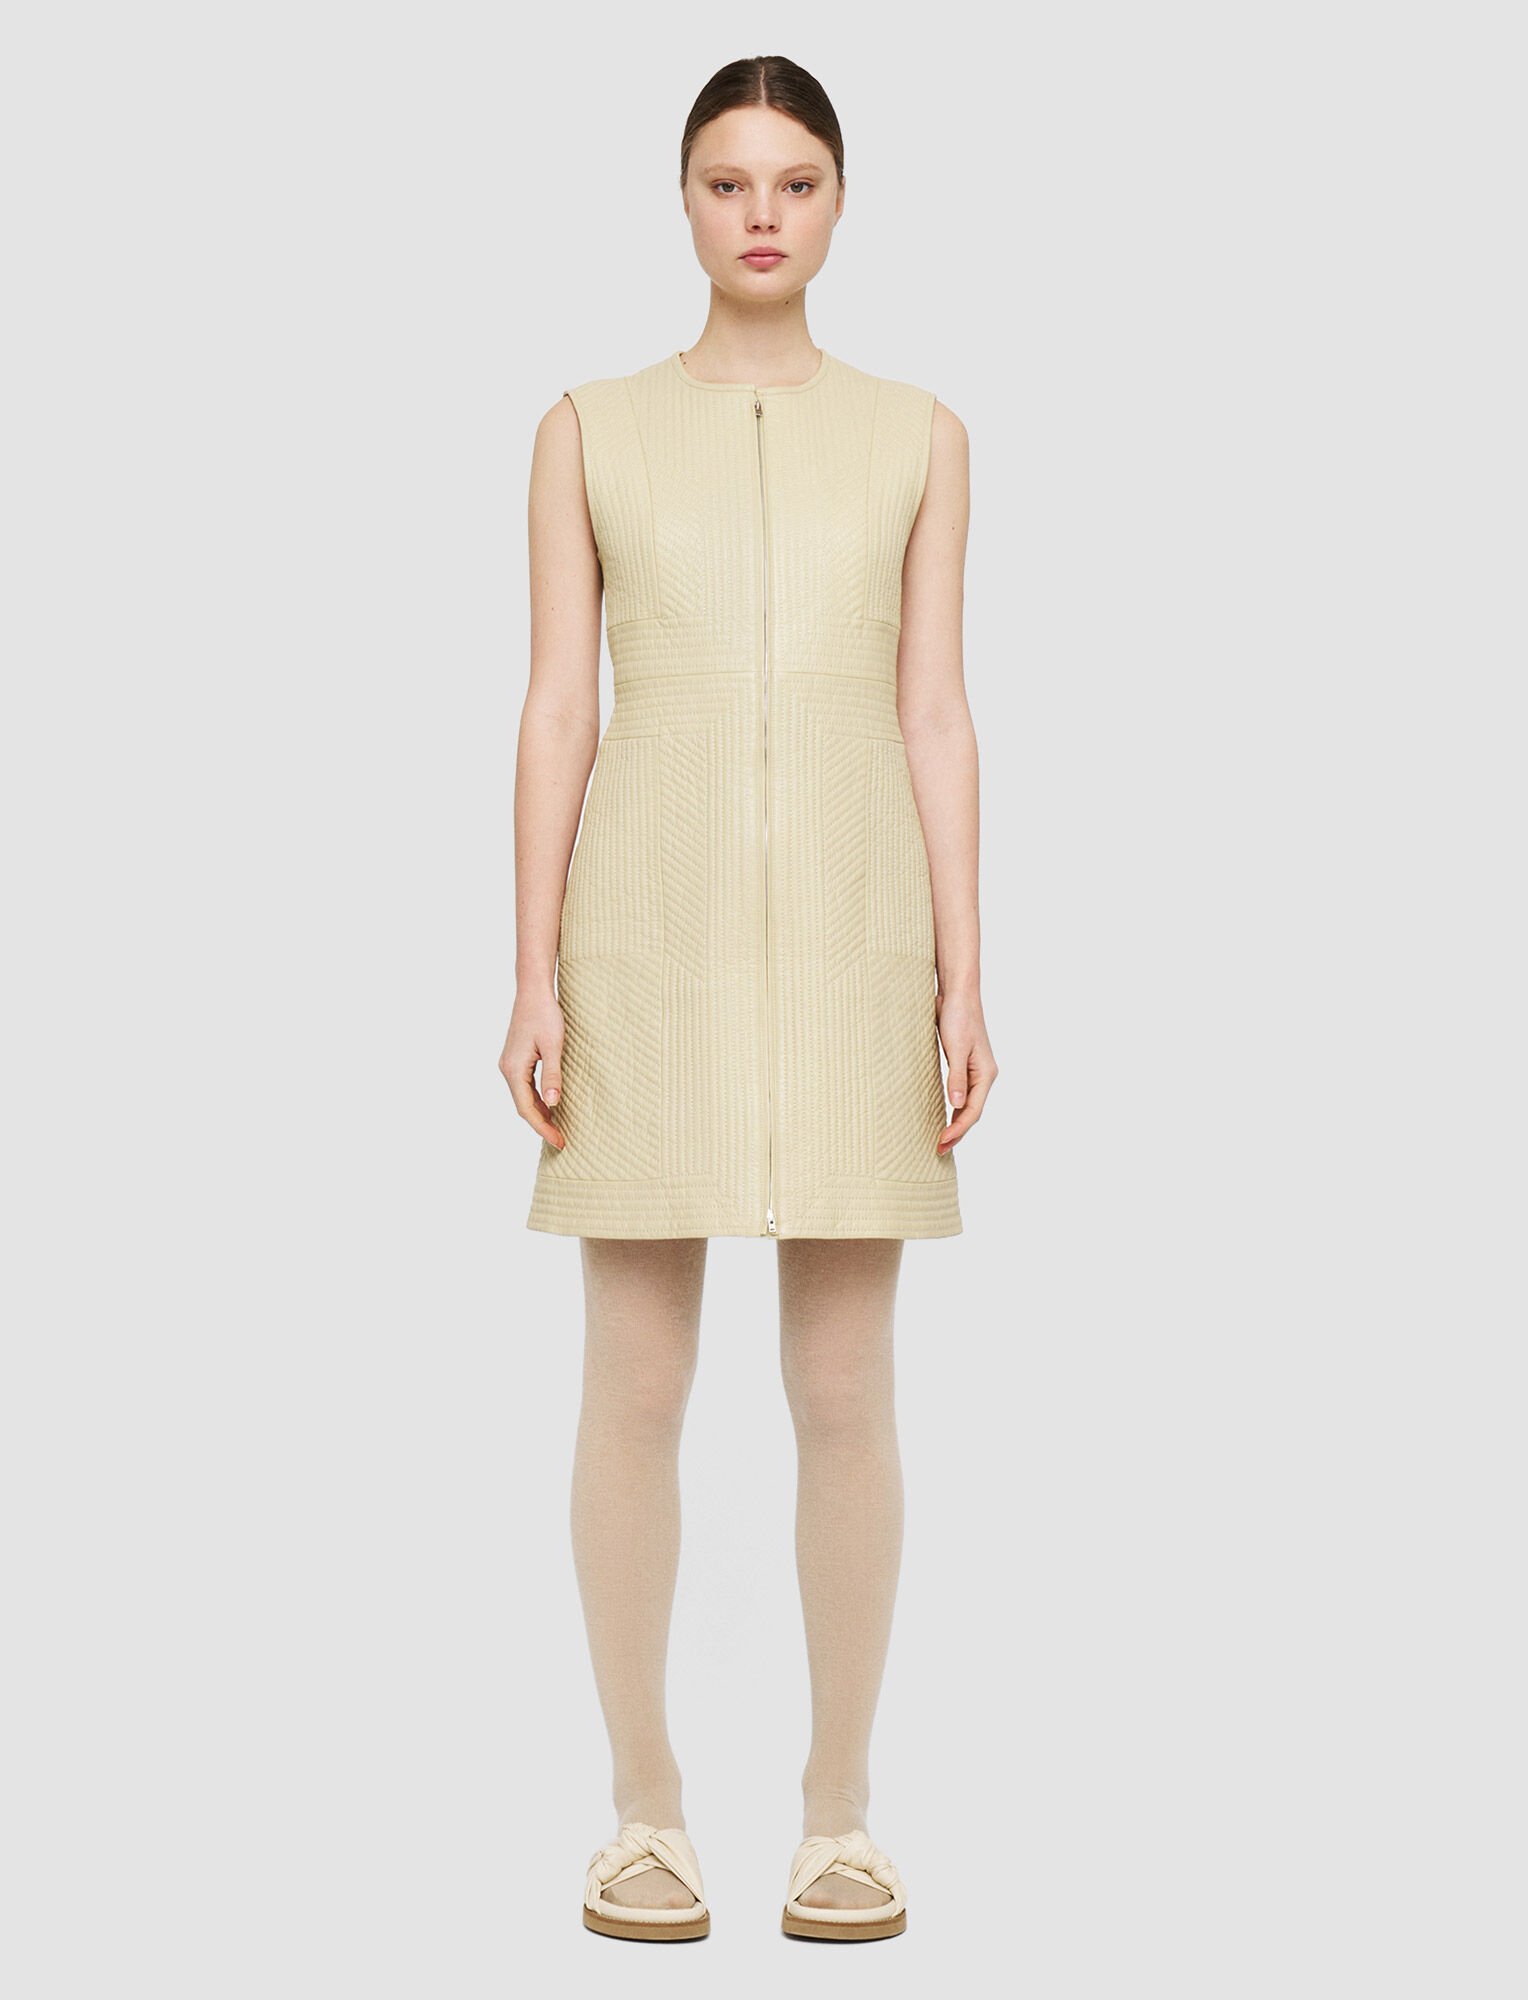 Joseph, Embellished Leather Davy Dress, in Pale Olive